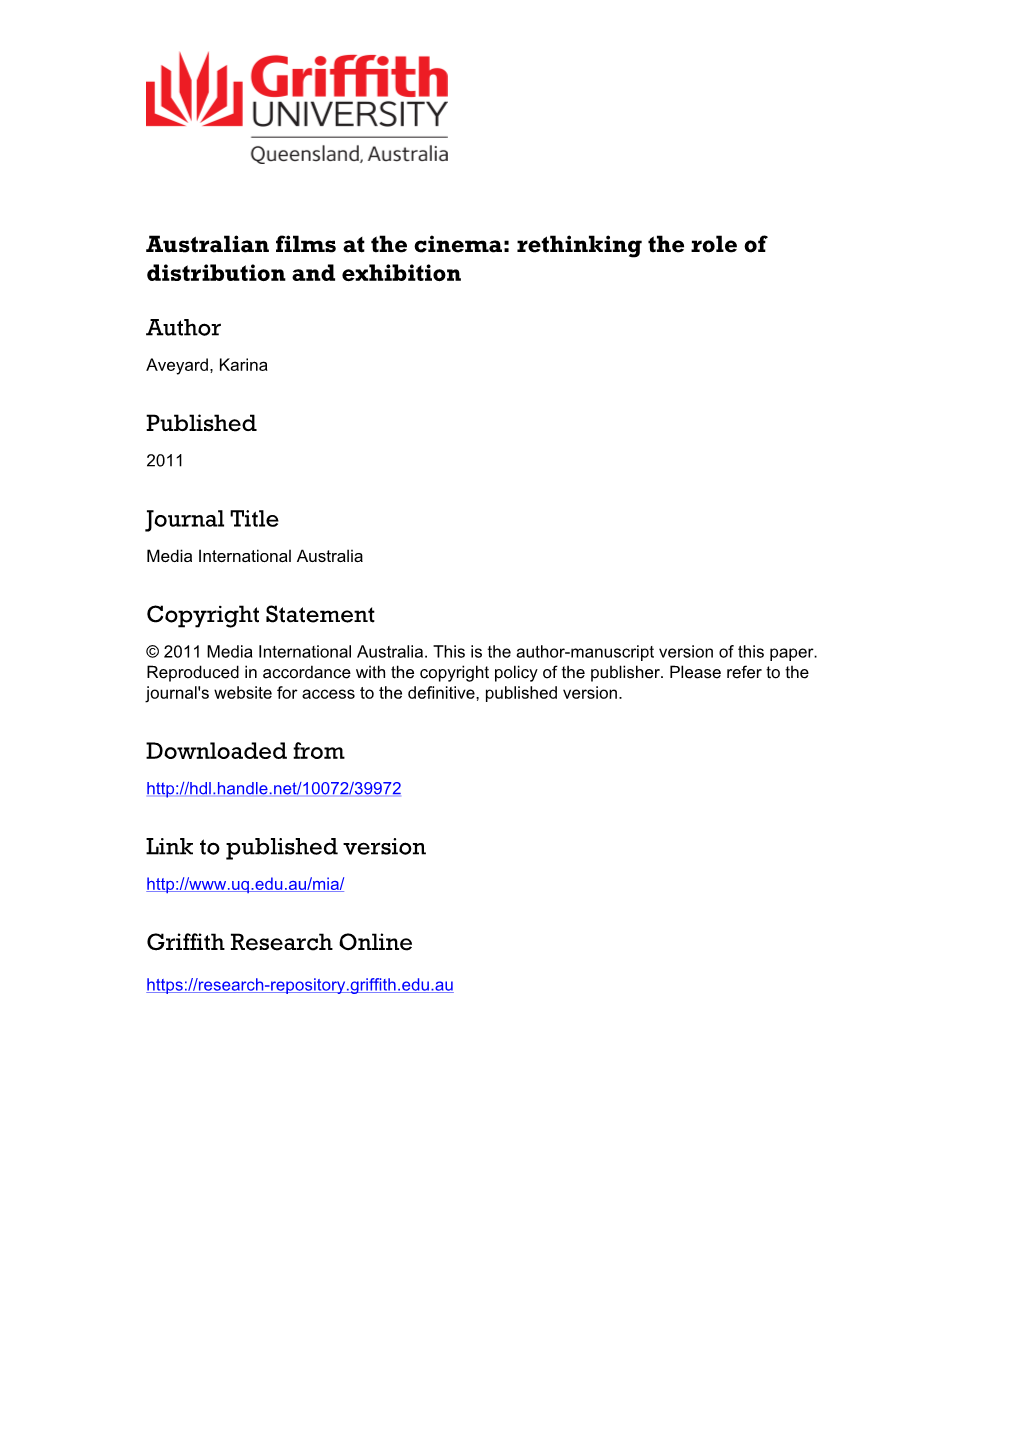 Article Title: Australian Films at the Cinema: Rethinking the Role of Distribution and Exhibition